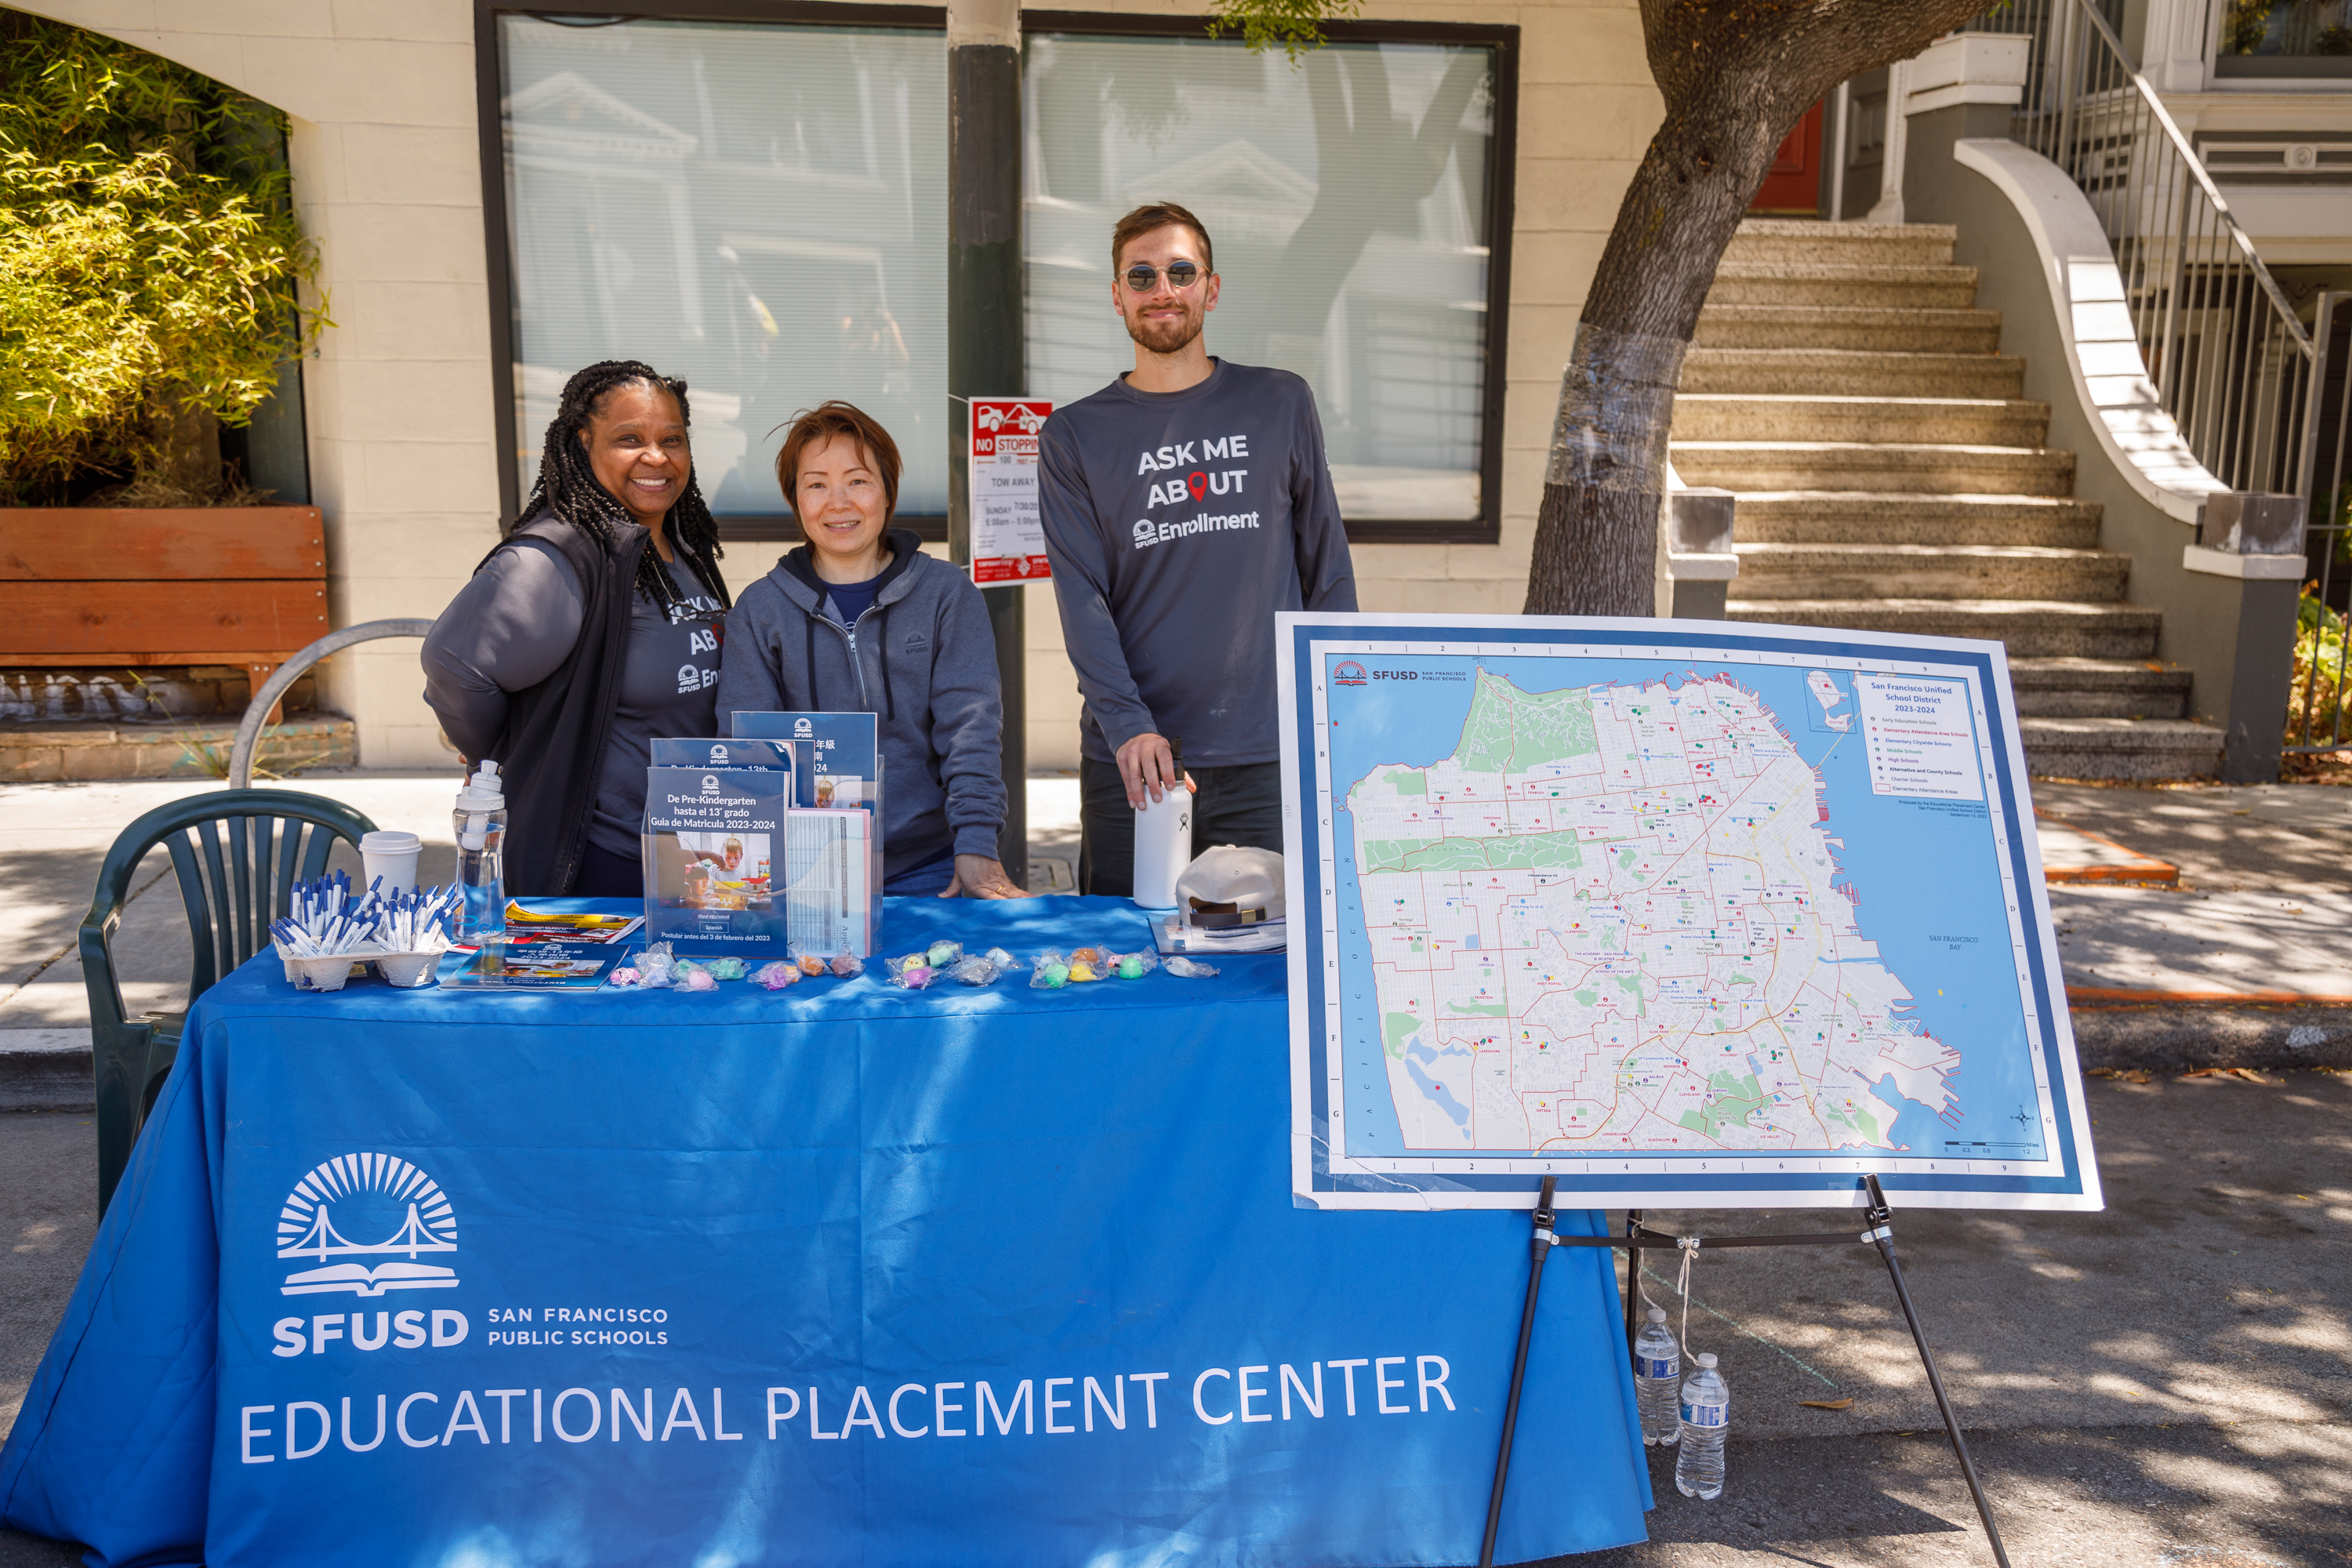 Three people stand behind a table from the SFUSD Educational Placement Center with informational materials and a map.